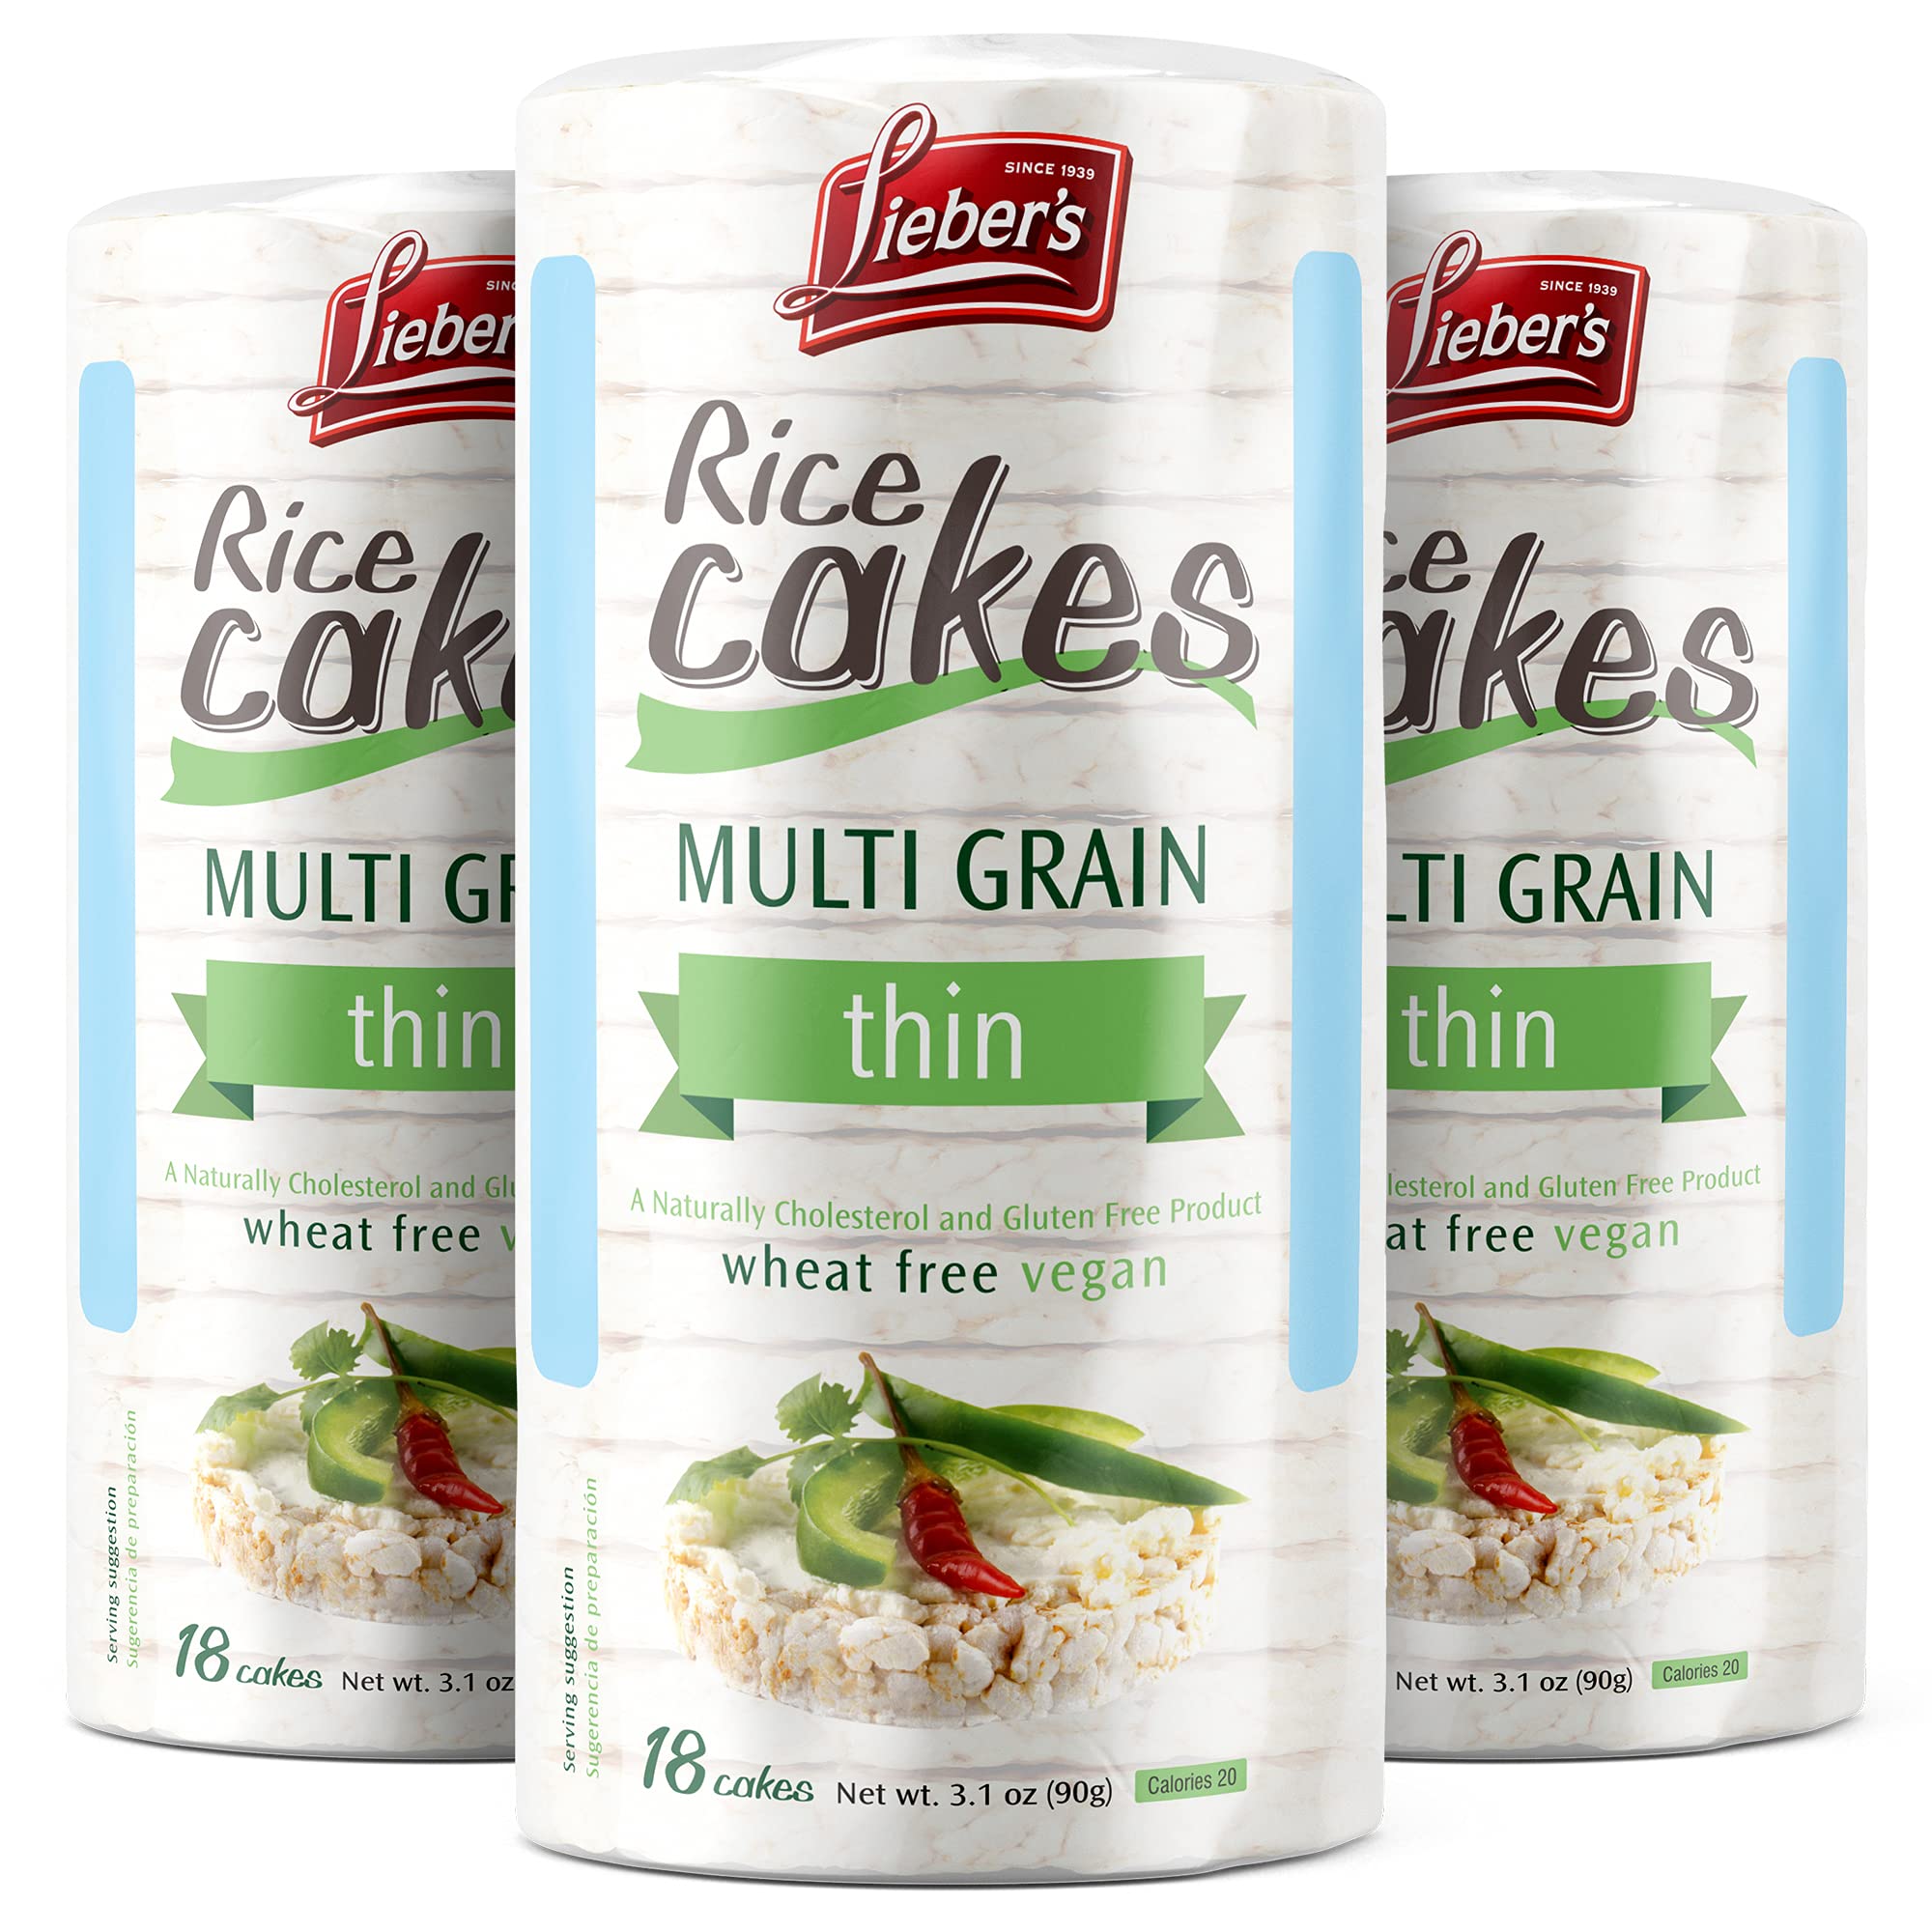 Are Rice Cakes Gluten-Free: Assessing Gluten Content in Rice Cakes